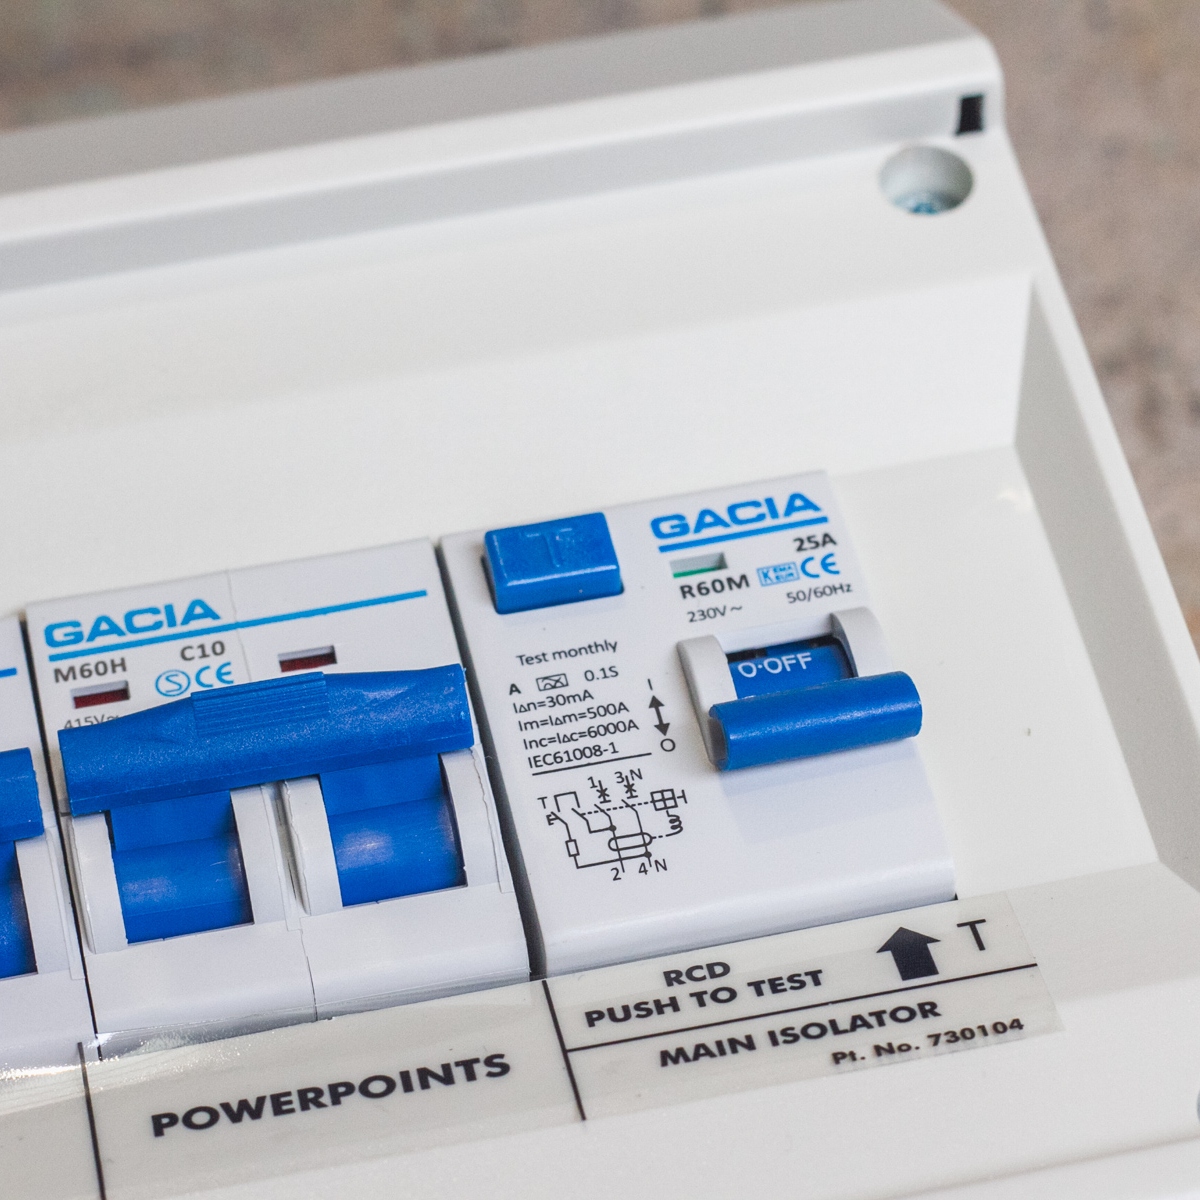 Close-up of a Consumer Unit - 25A RCD‚ 10A & 6A double pole MCB with blue switches labeled PowerPoints, Main Isolator, and RCD Push to Test.